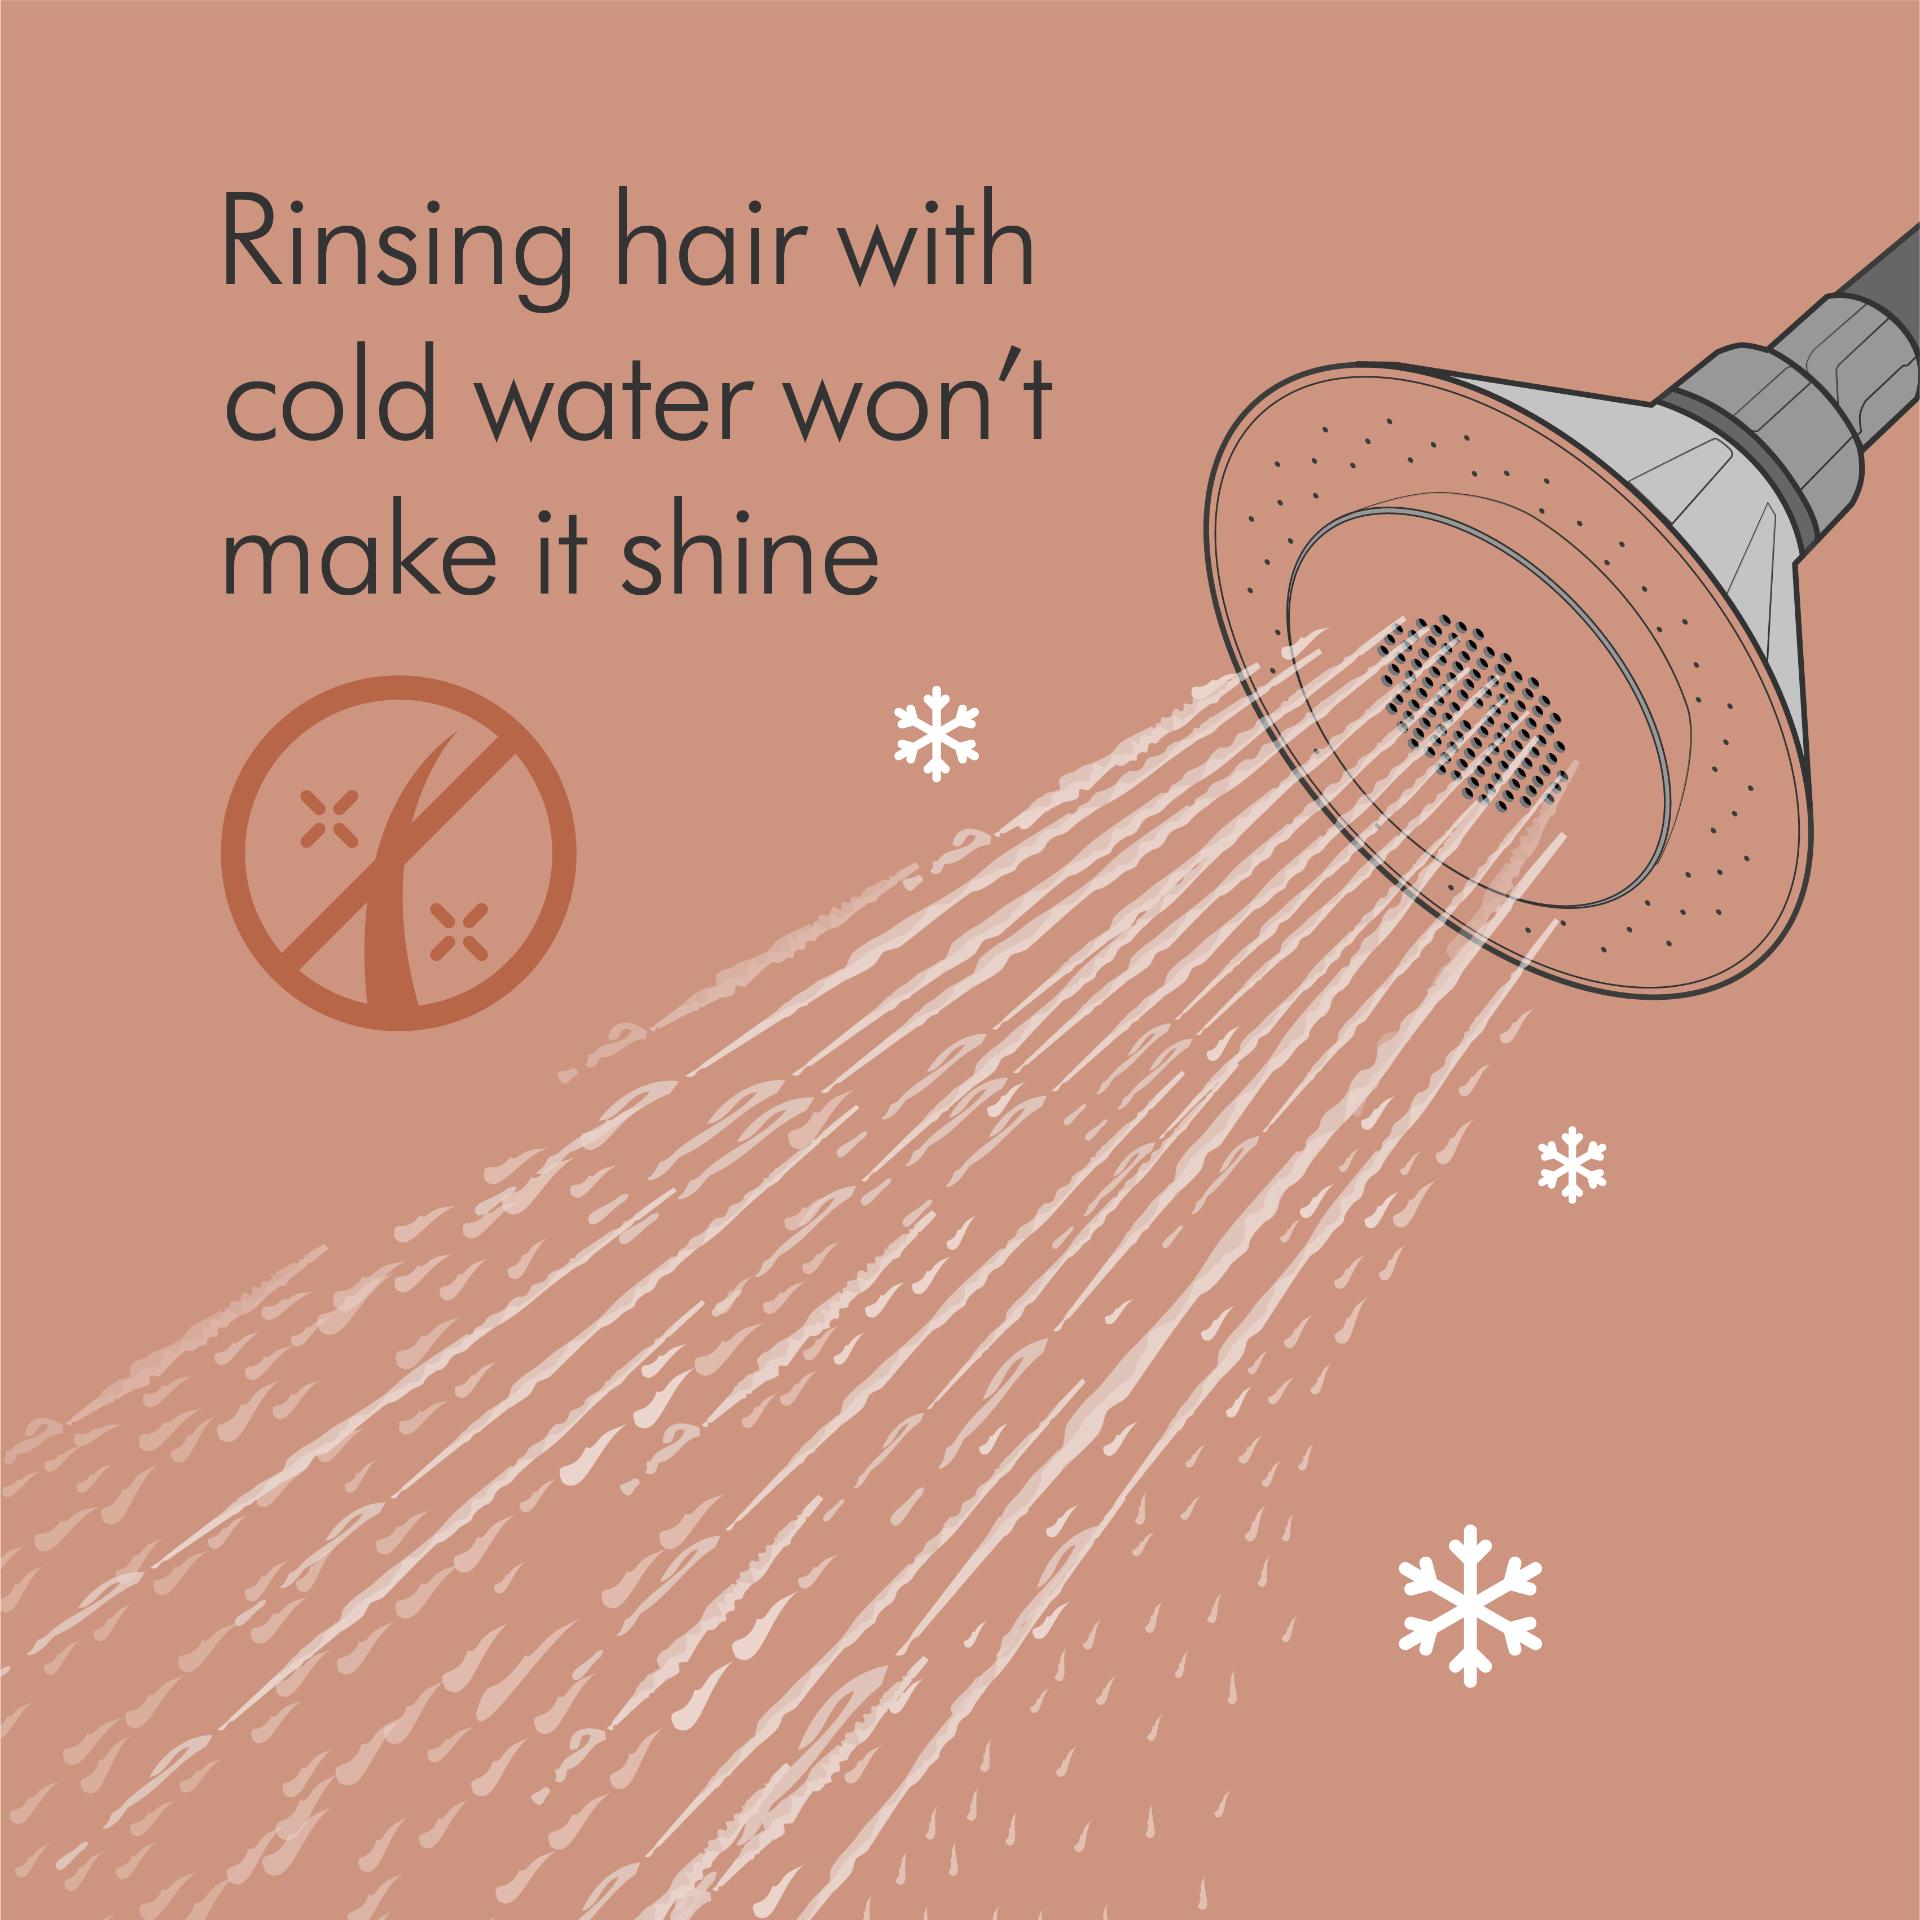 Rinsing with cold water